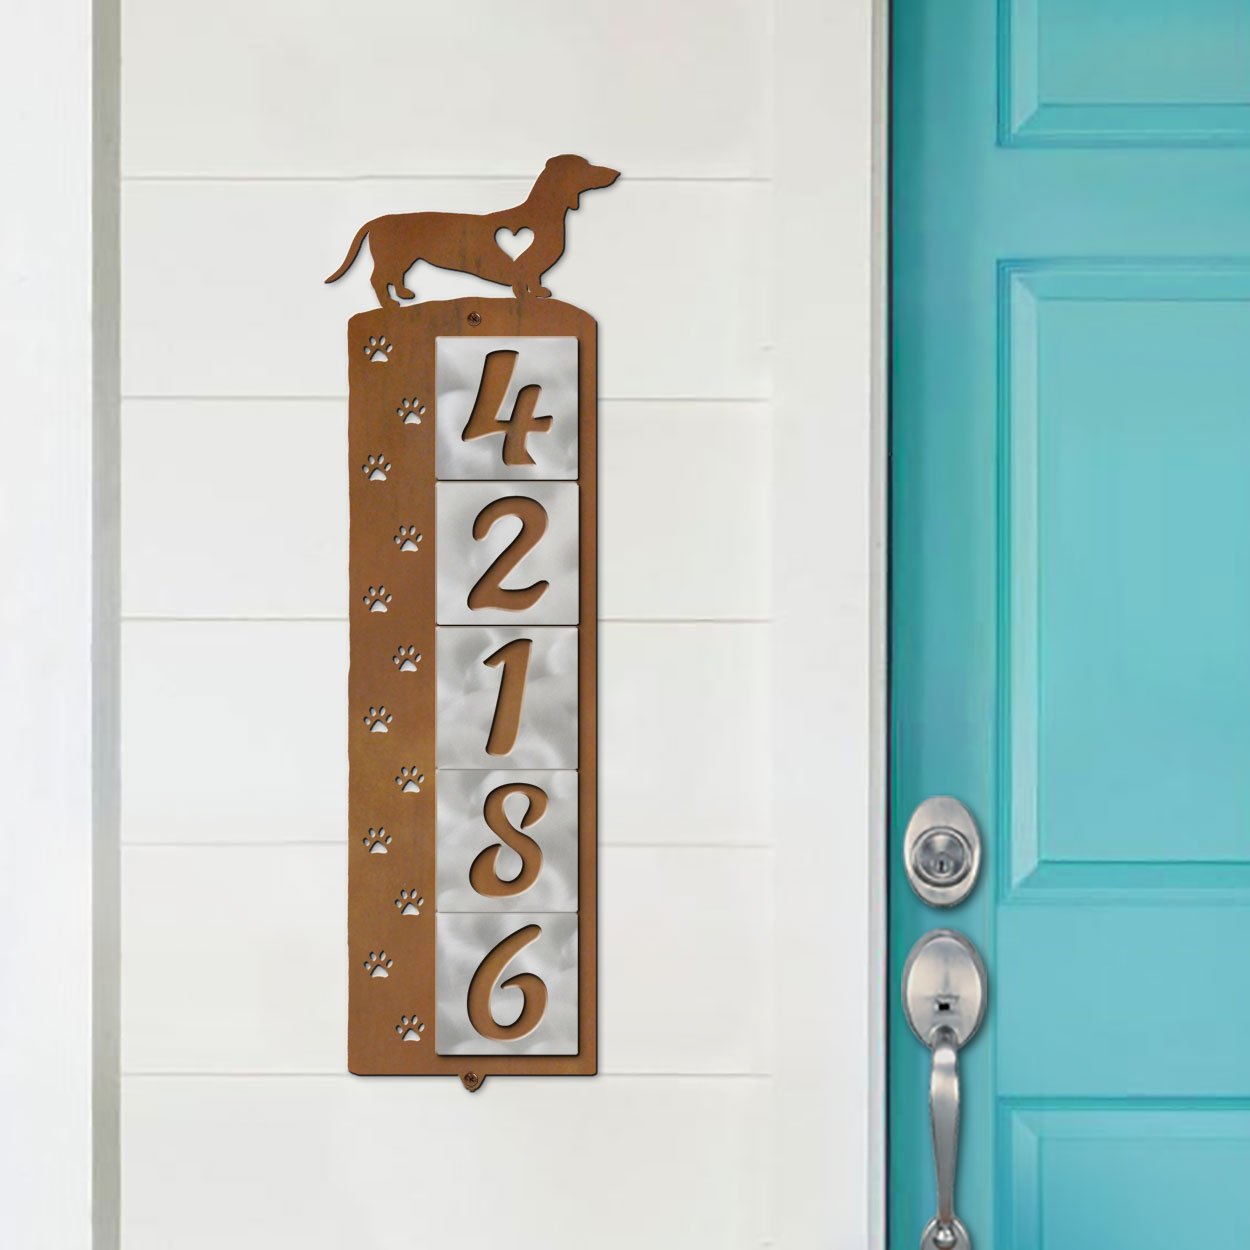 606185 - Dachshund Nose Prints 5-Digit Vertical Tile House Numbers